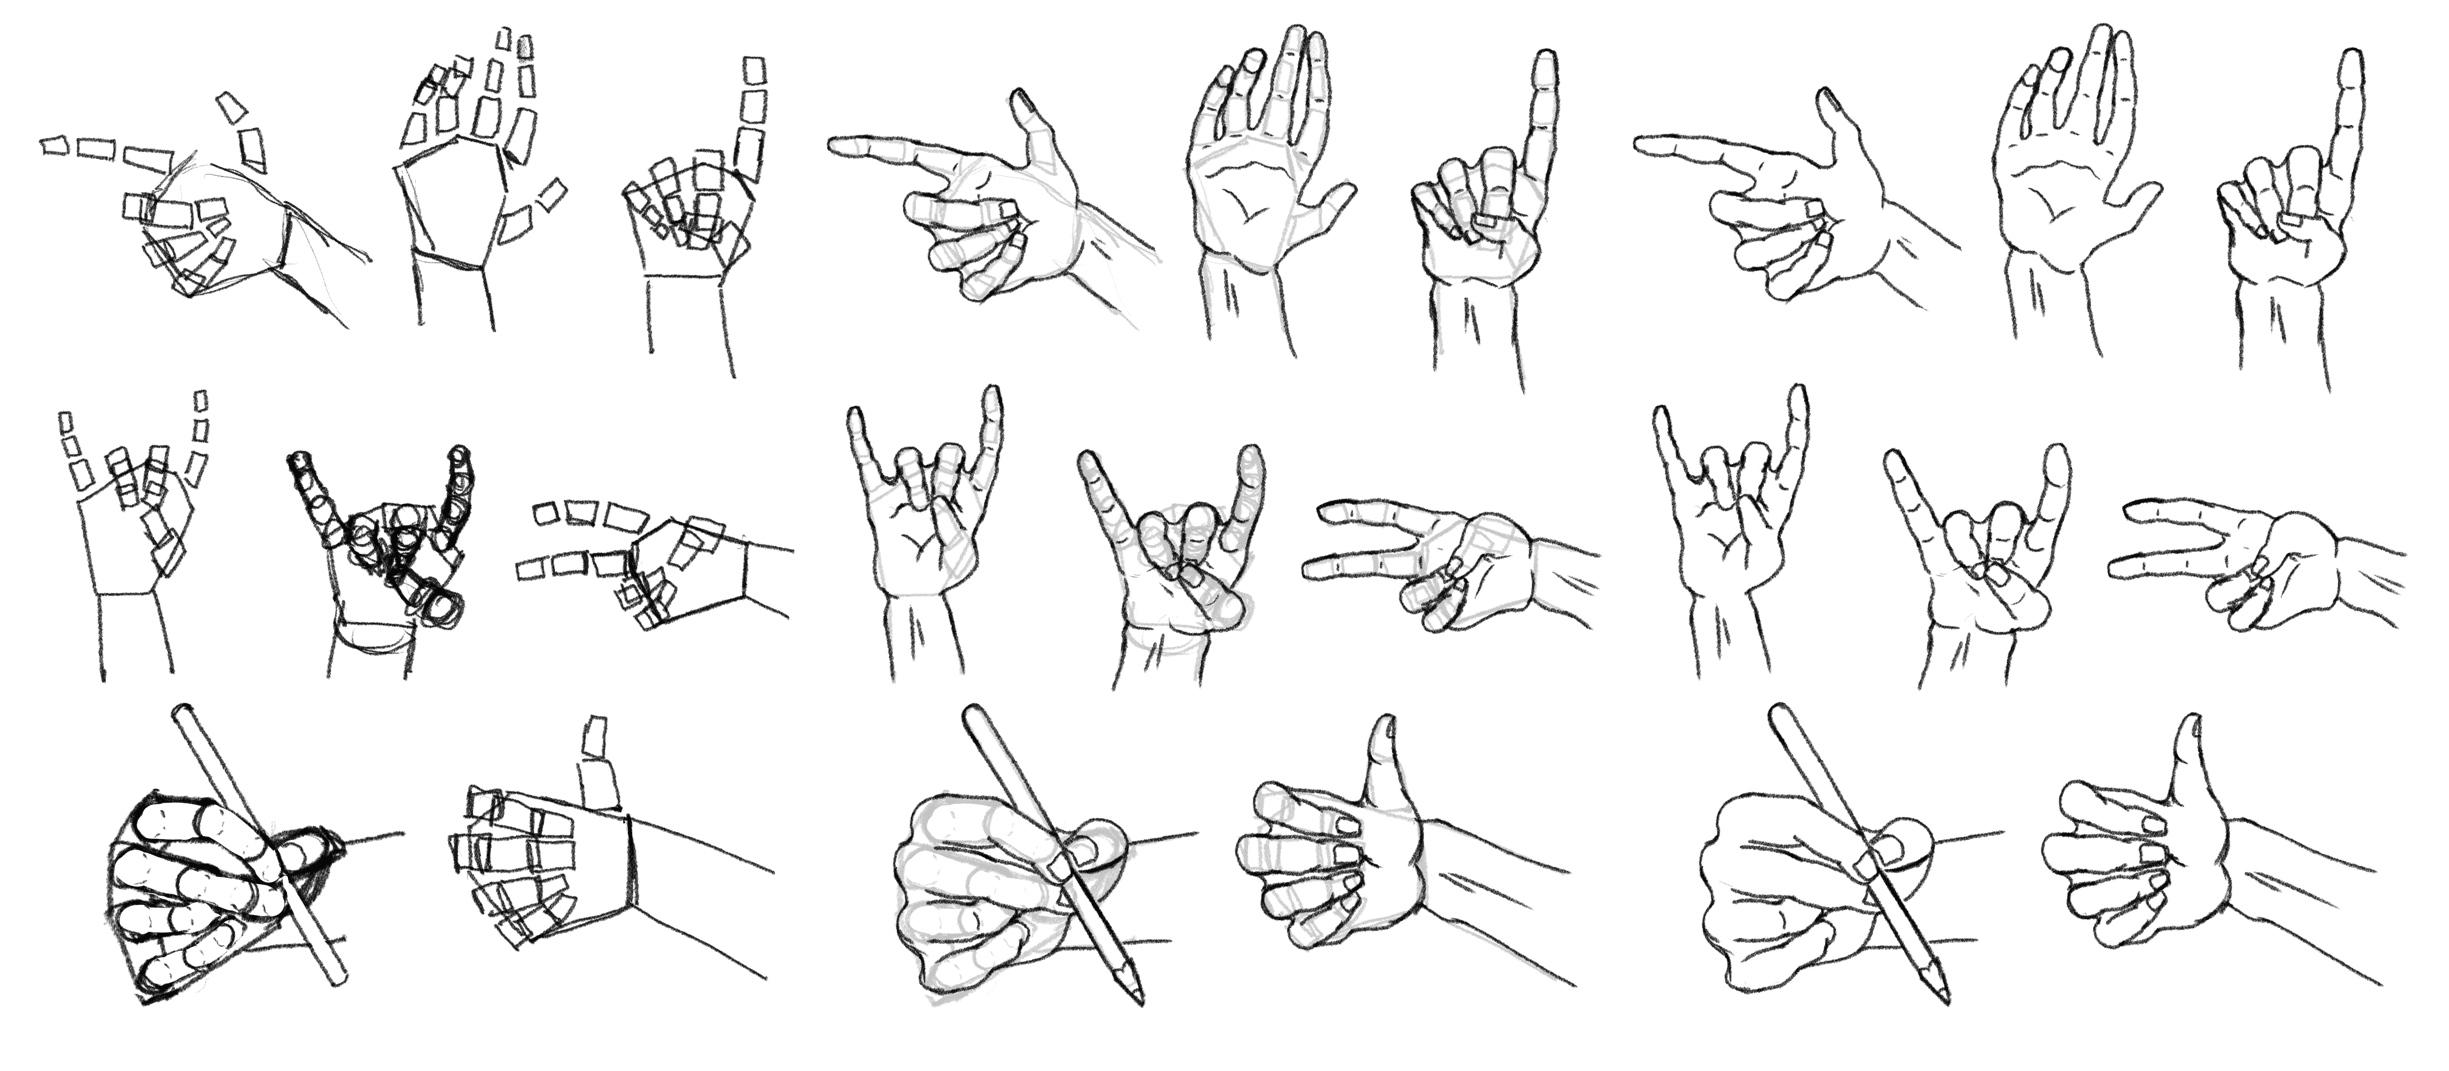 A collection of hand illustrations.